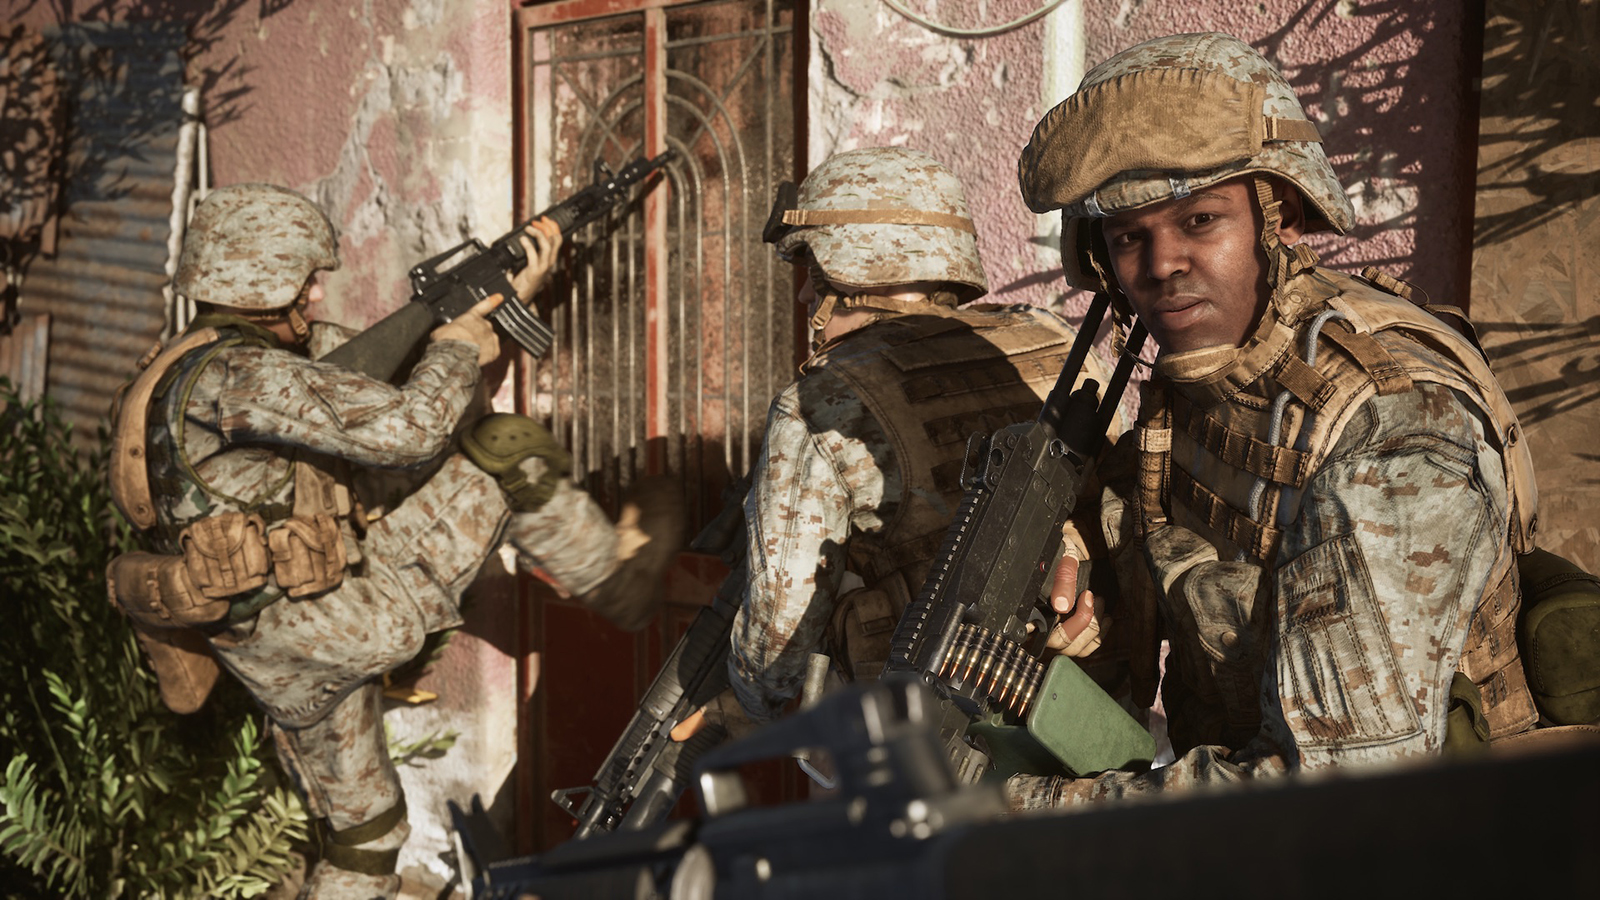 A still from the “Six Days in Fallujah” video game. Image courtesy Victura